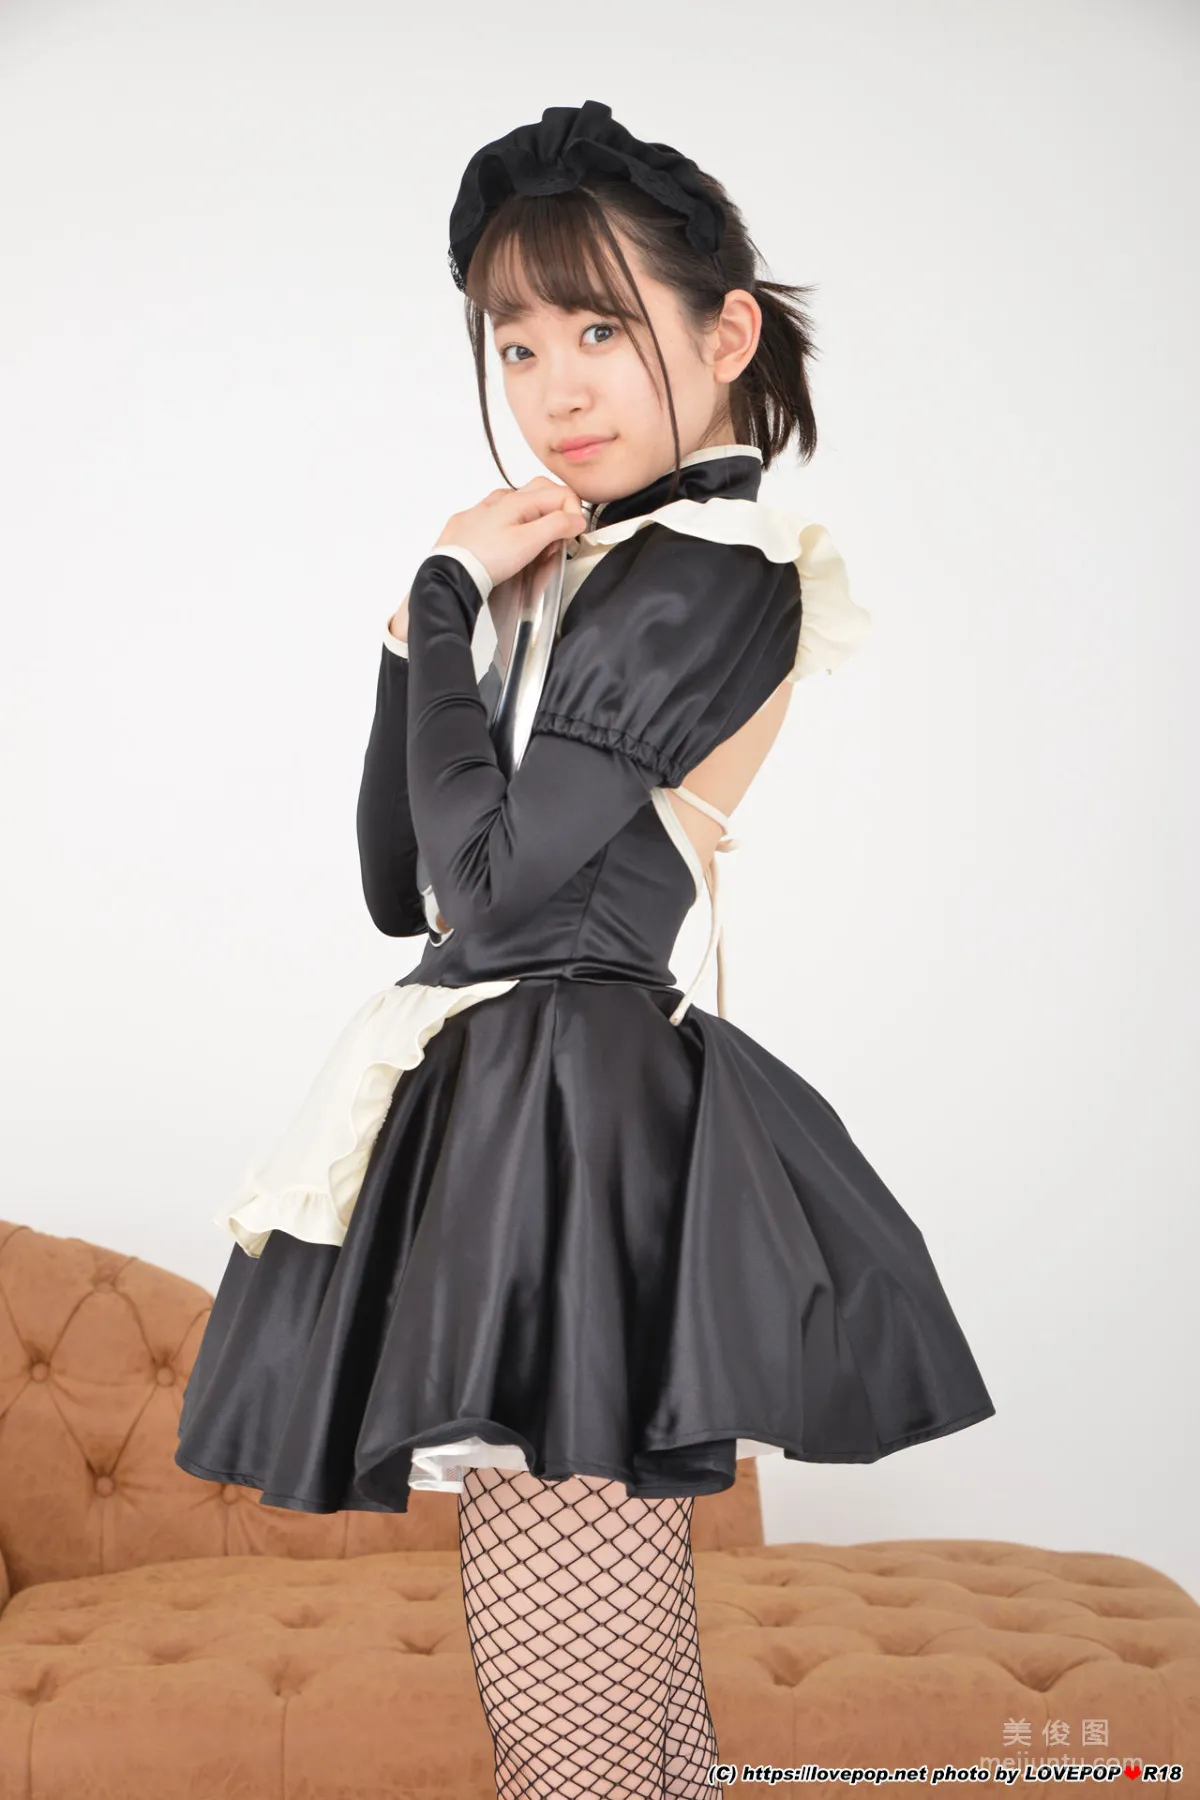 [LOVEPOP] Special Maid Collection - 架乃ゆら Photoset 025